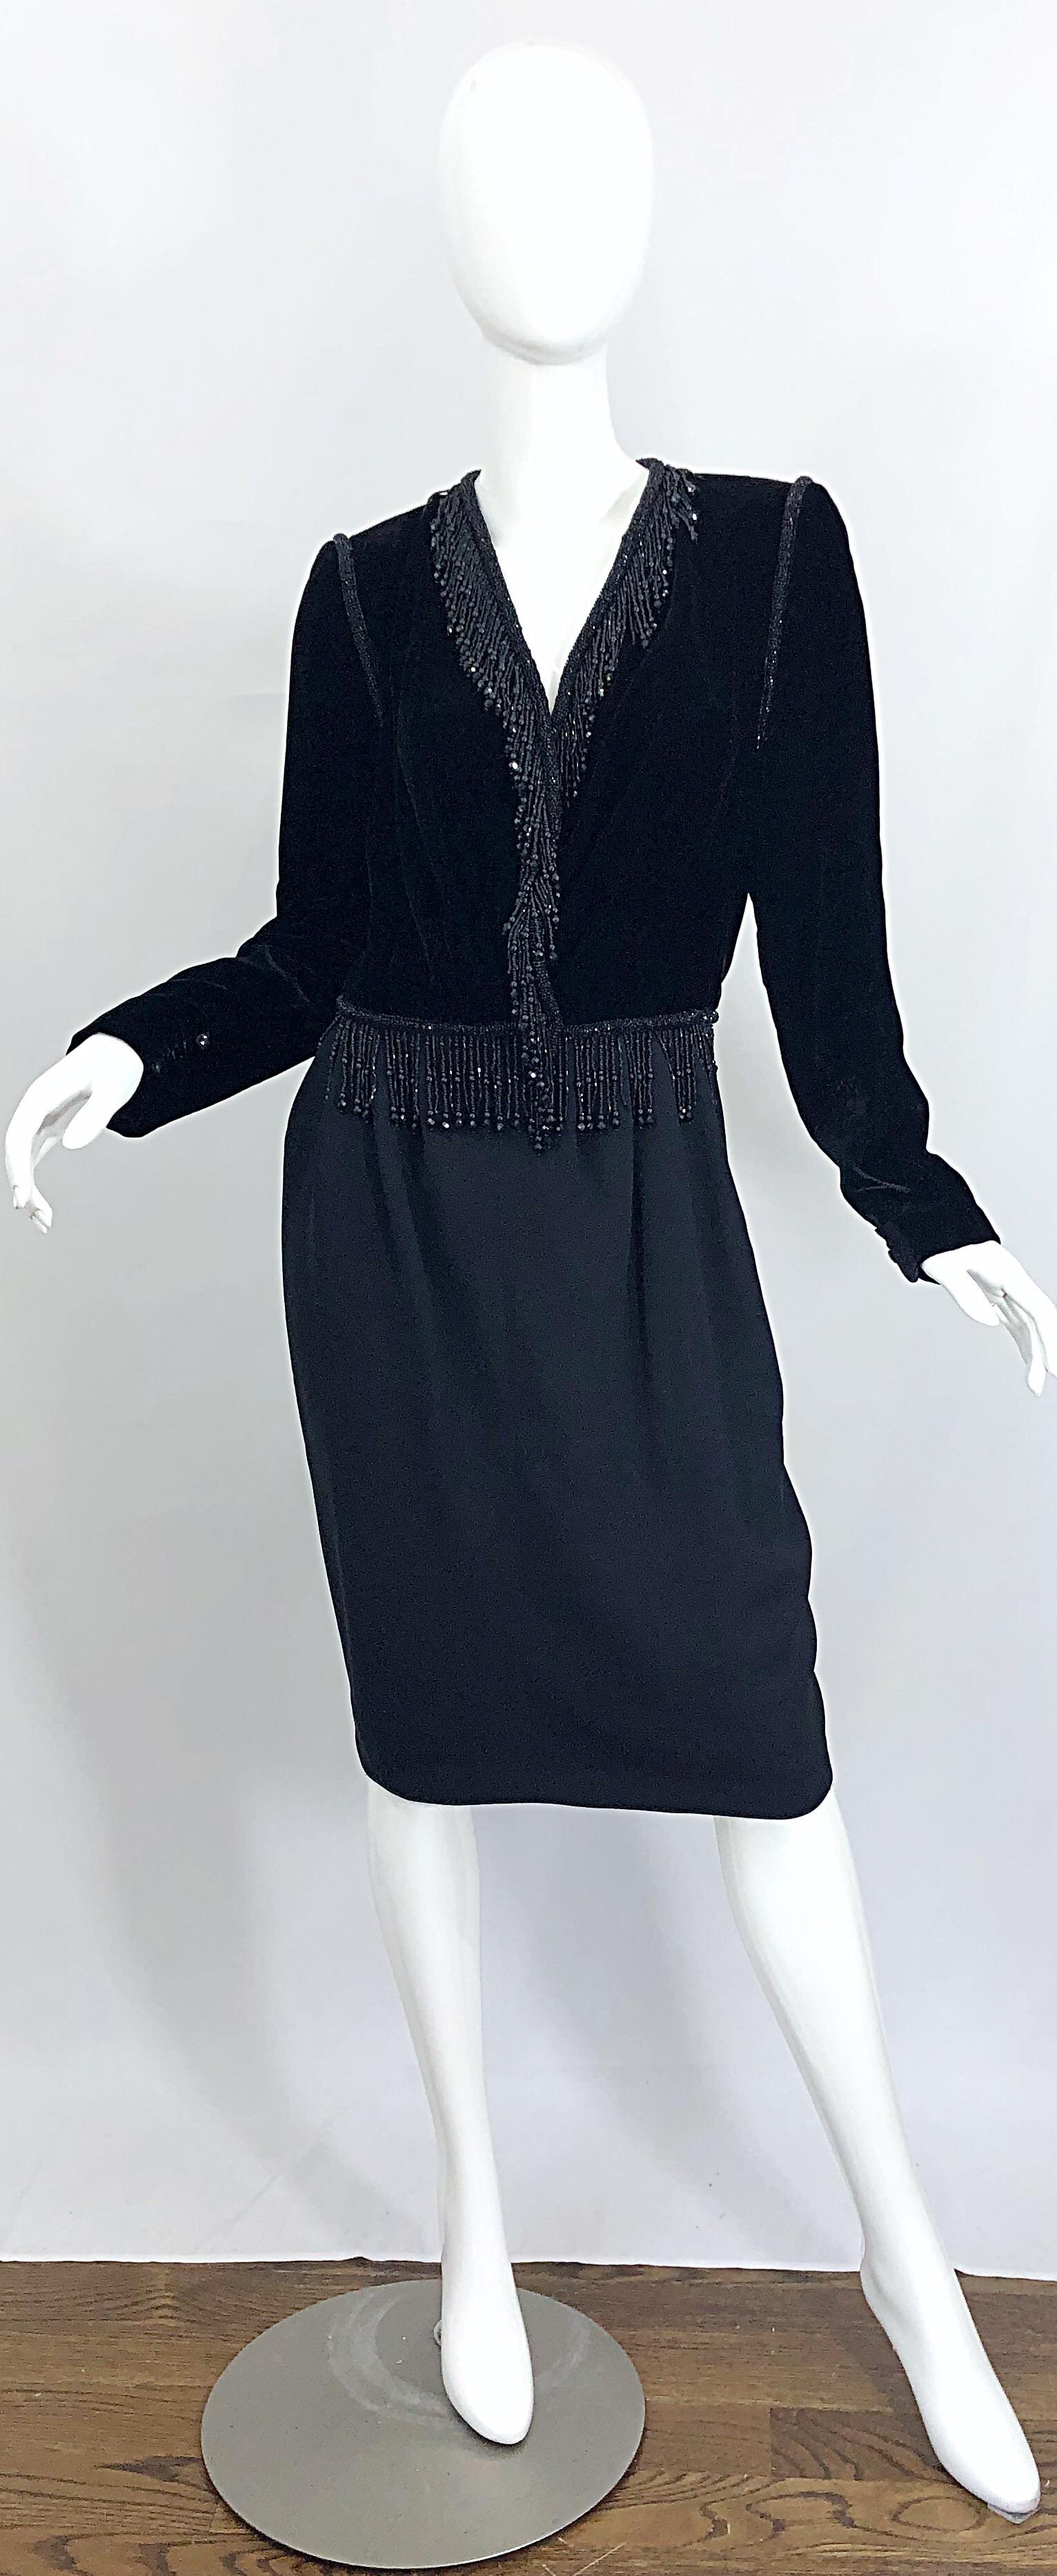 Beautiful vintage ODICINI COUTURE larger size black velvet and rayon beaded long sleeve dress ! I scooped this beauty up in Rome last year ( before Coronavirus COVID days ) from a well known socialite's estate.
Black velvet bodice with hand-sewn